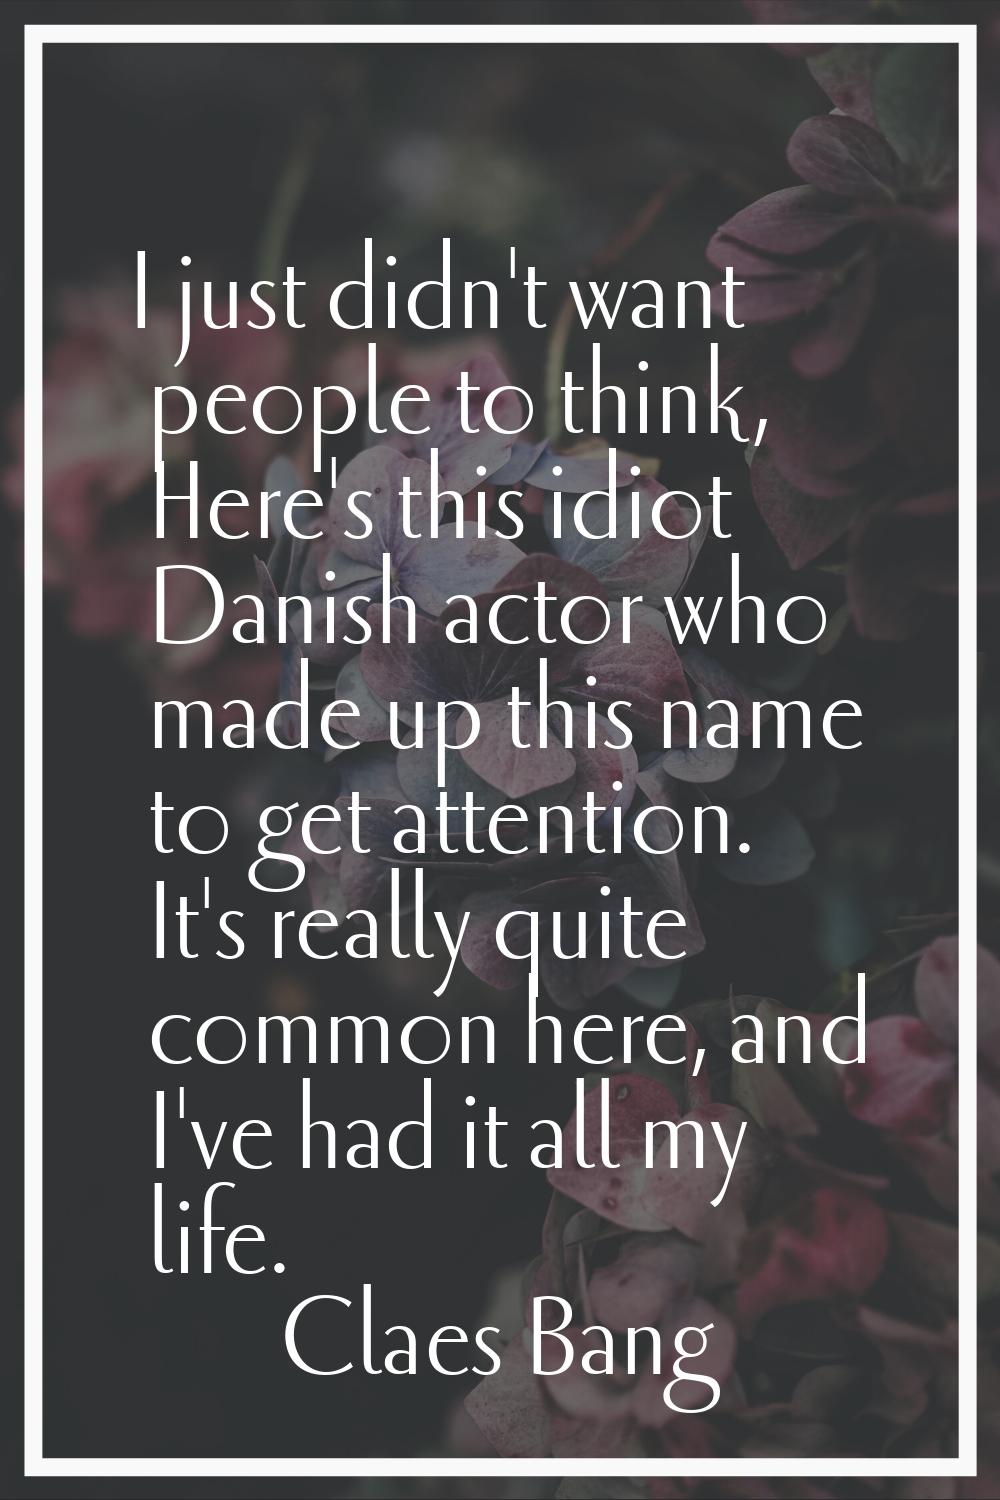 I just didn't want people to think, Here's this idiot Danish actor who made up this name to get att